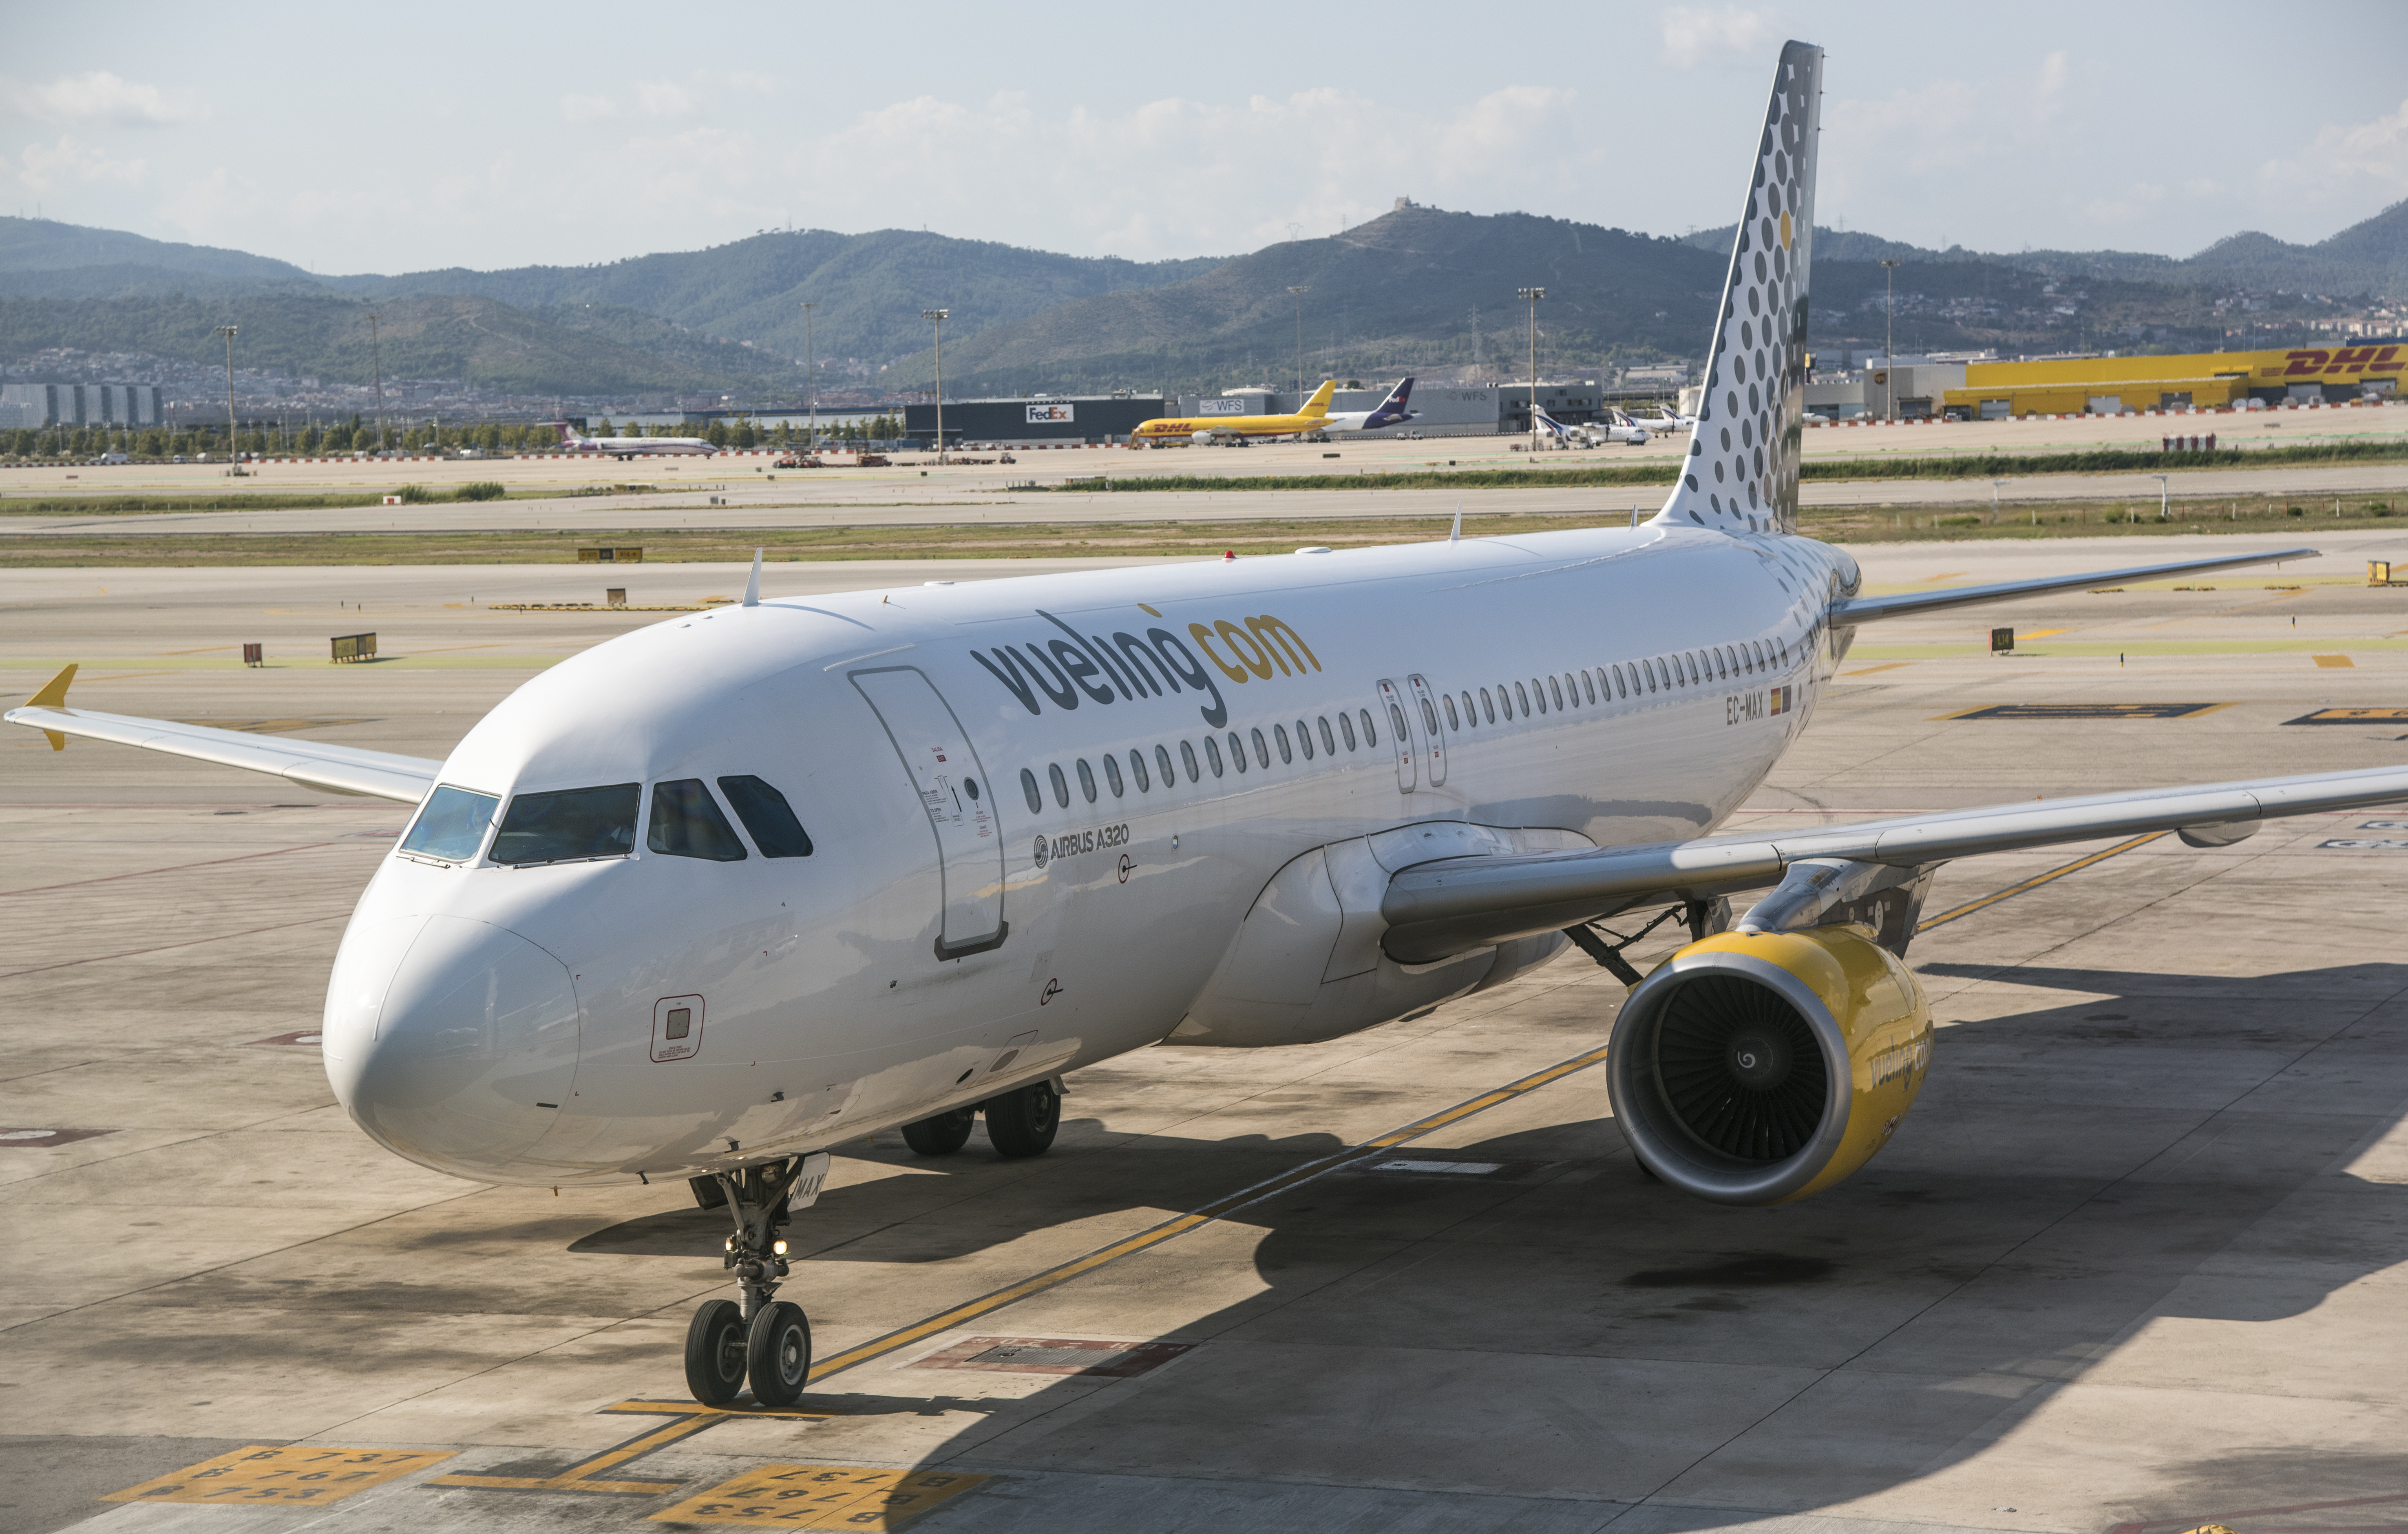 Vueling has launched bargain flights from Spain to the UK.